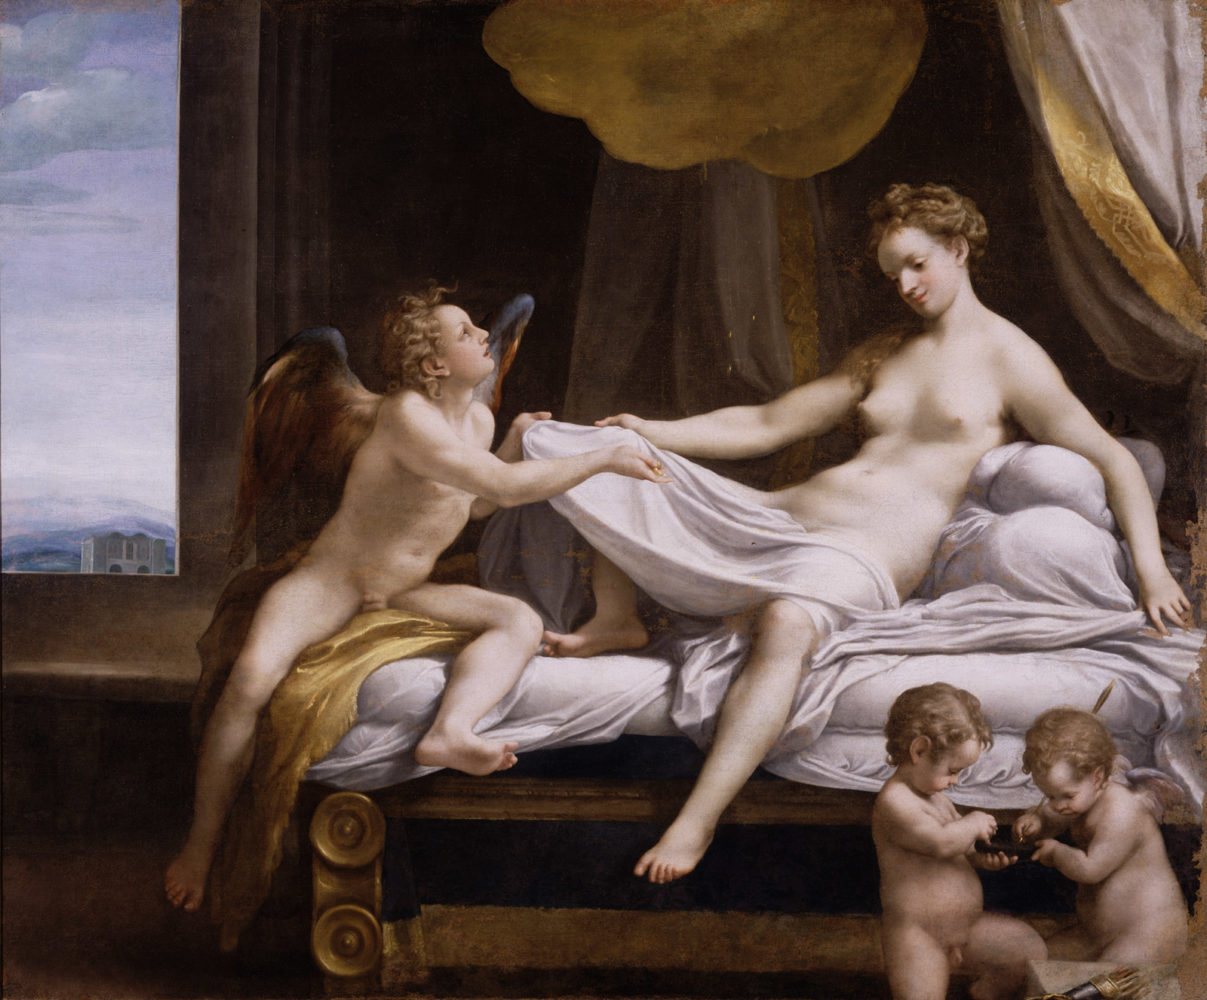 Sex, Power, and Violence in the Renaissance Nude pic